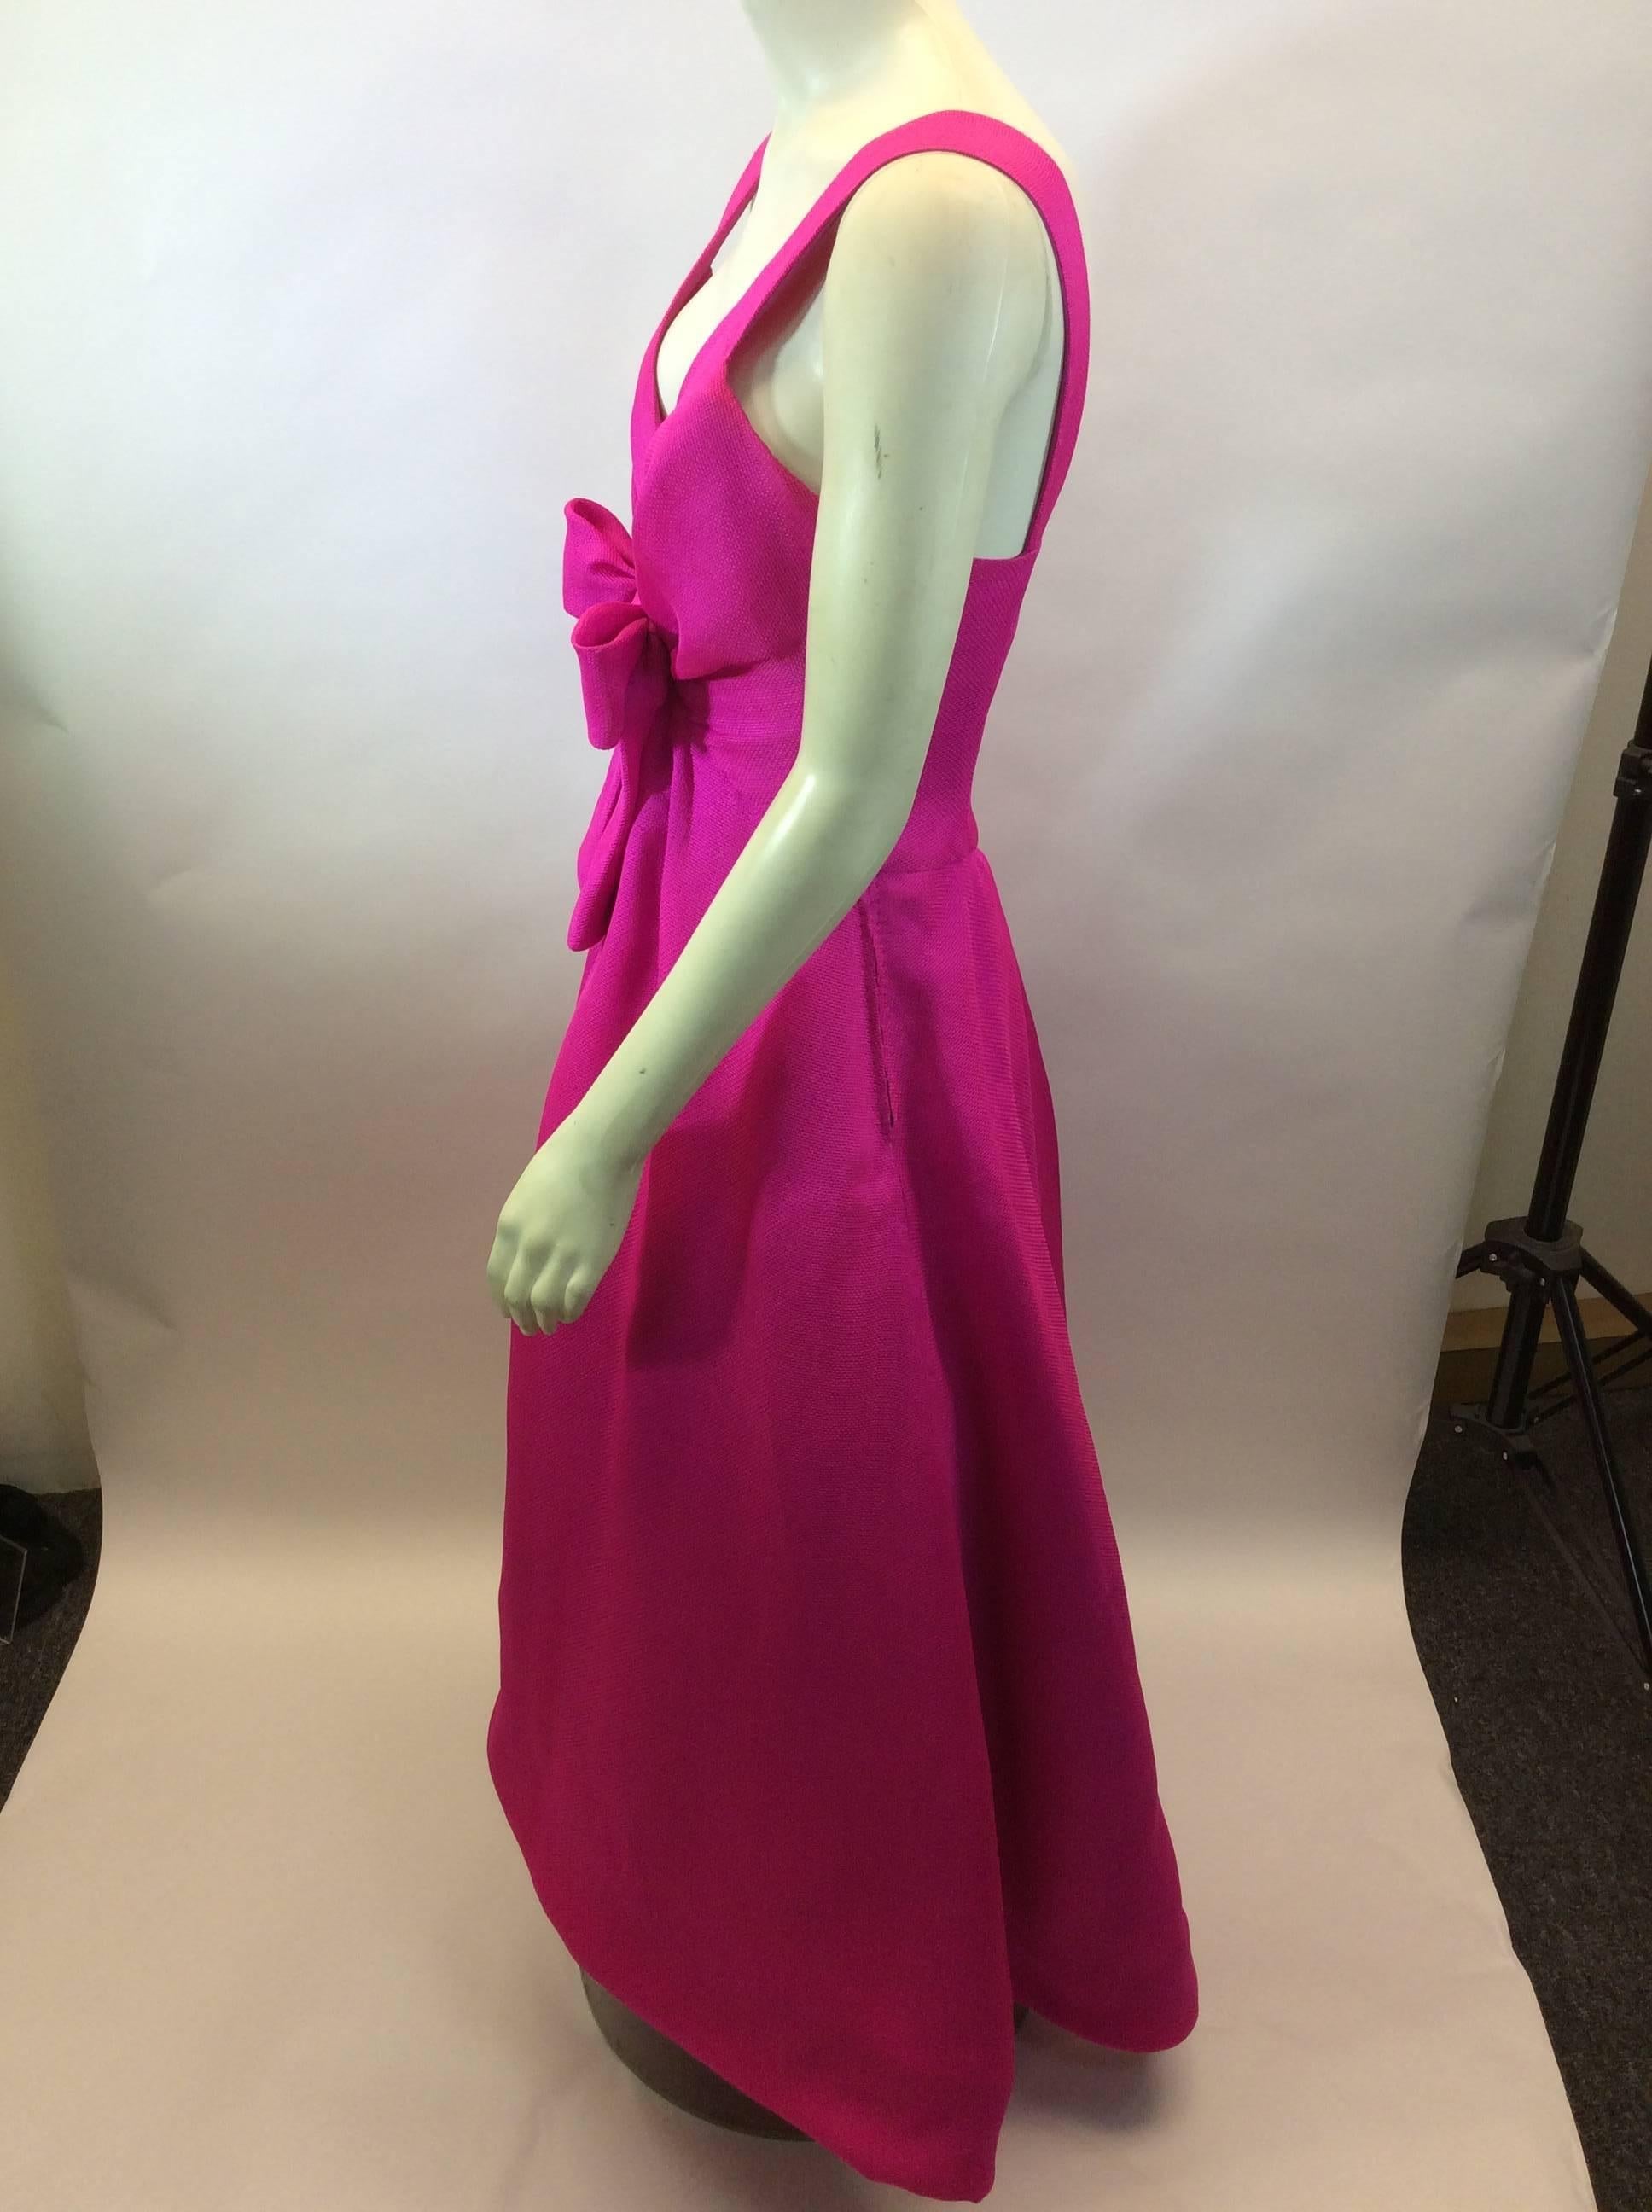 Scassi Vintage Fuchsia Formal Gown
$399
Length 49